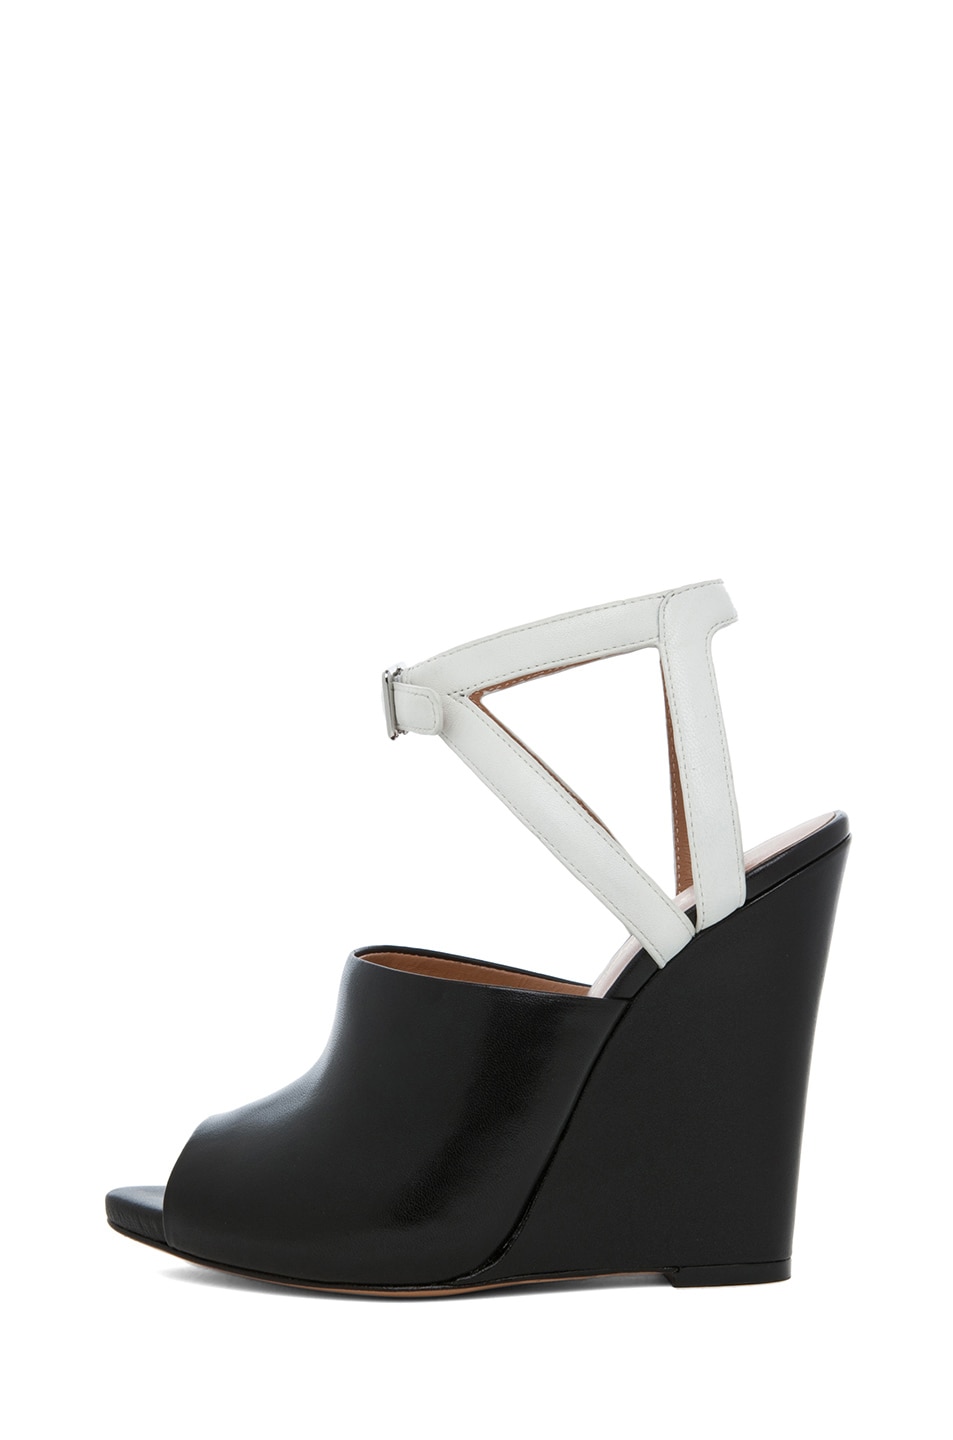 Image 1 of 3.1 phillip lim Juliette Leather Wedge in Black & White